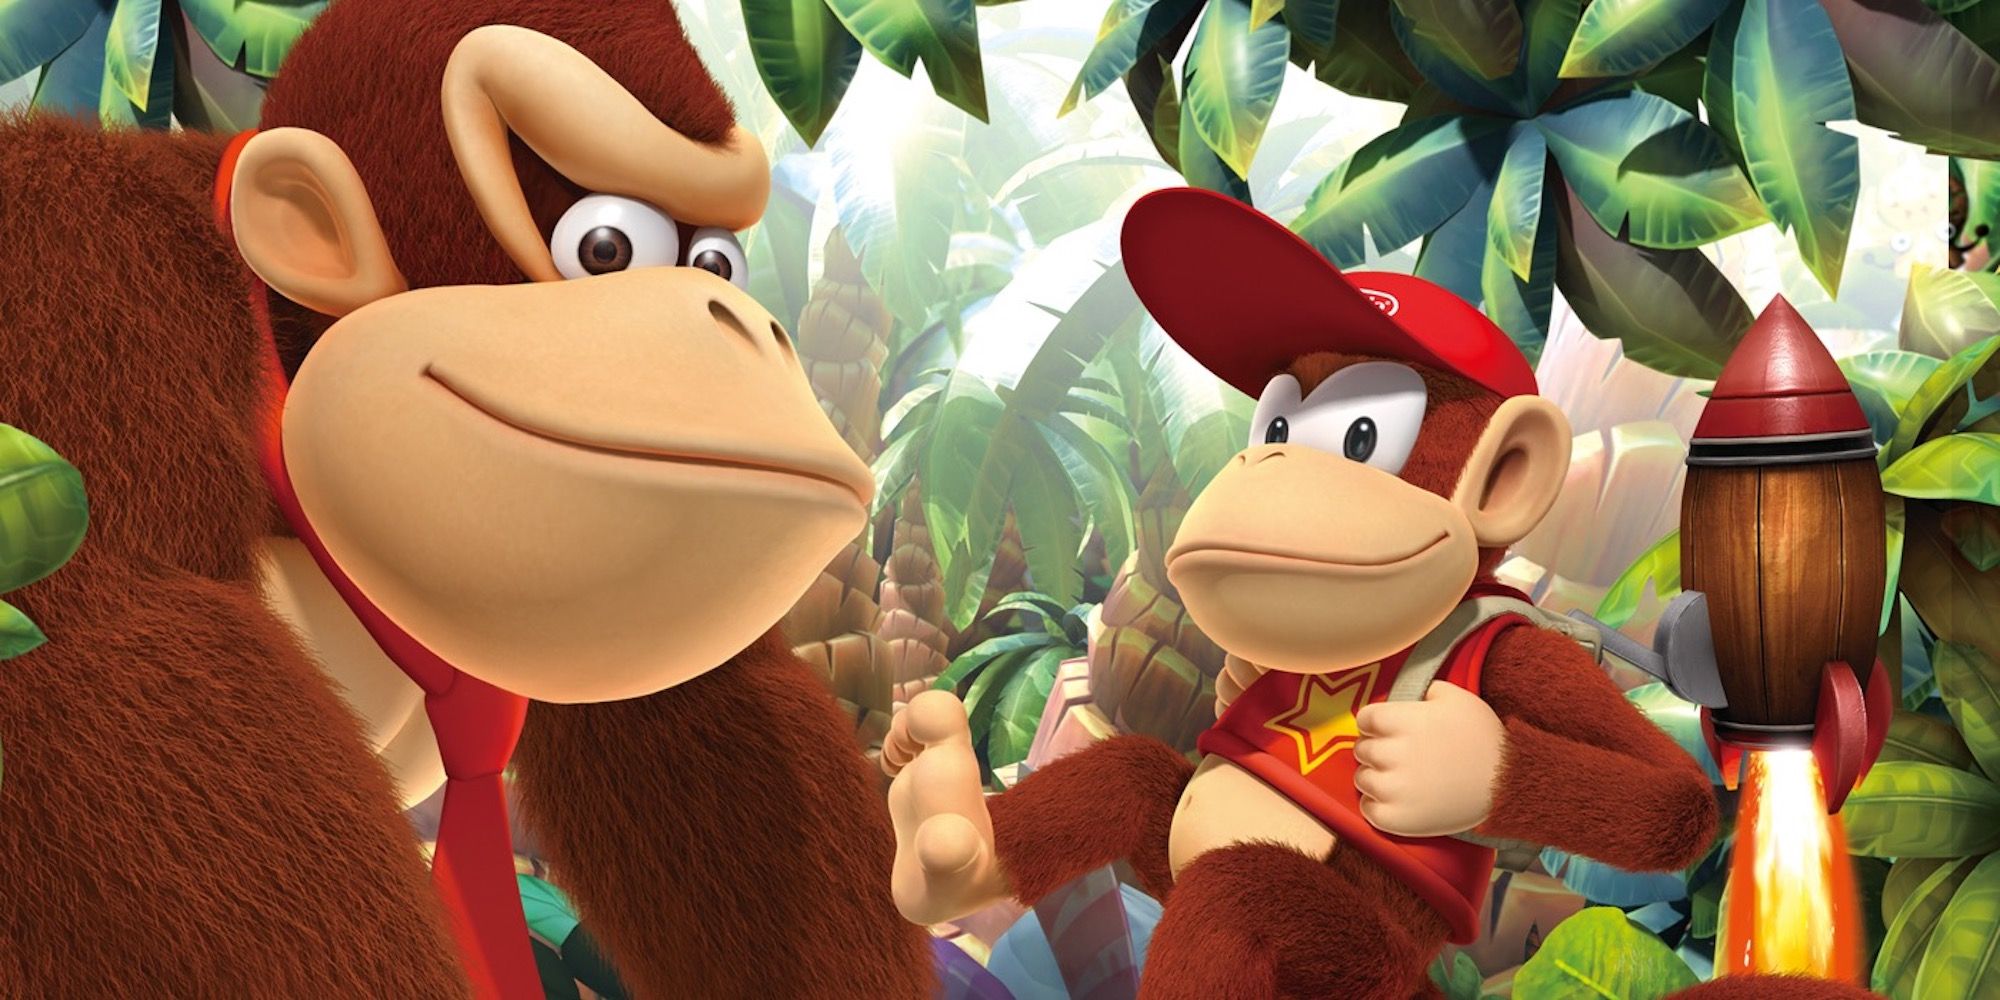 Donkey Kong and Diddy Kong in Donkey Kong Country Returns